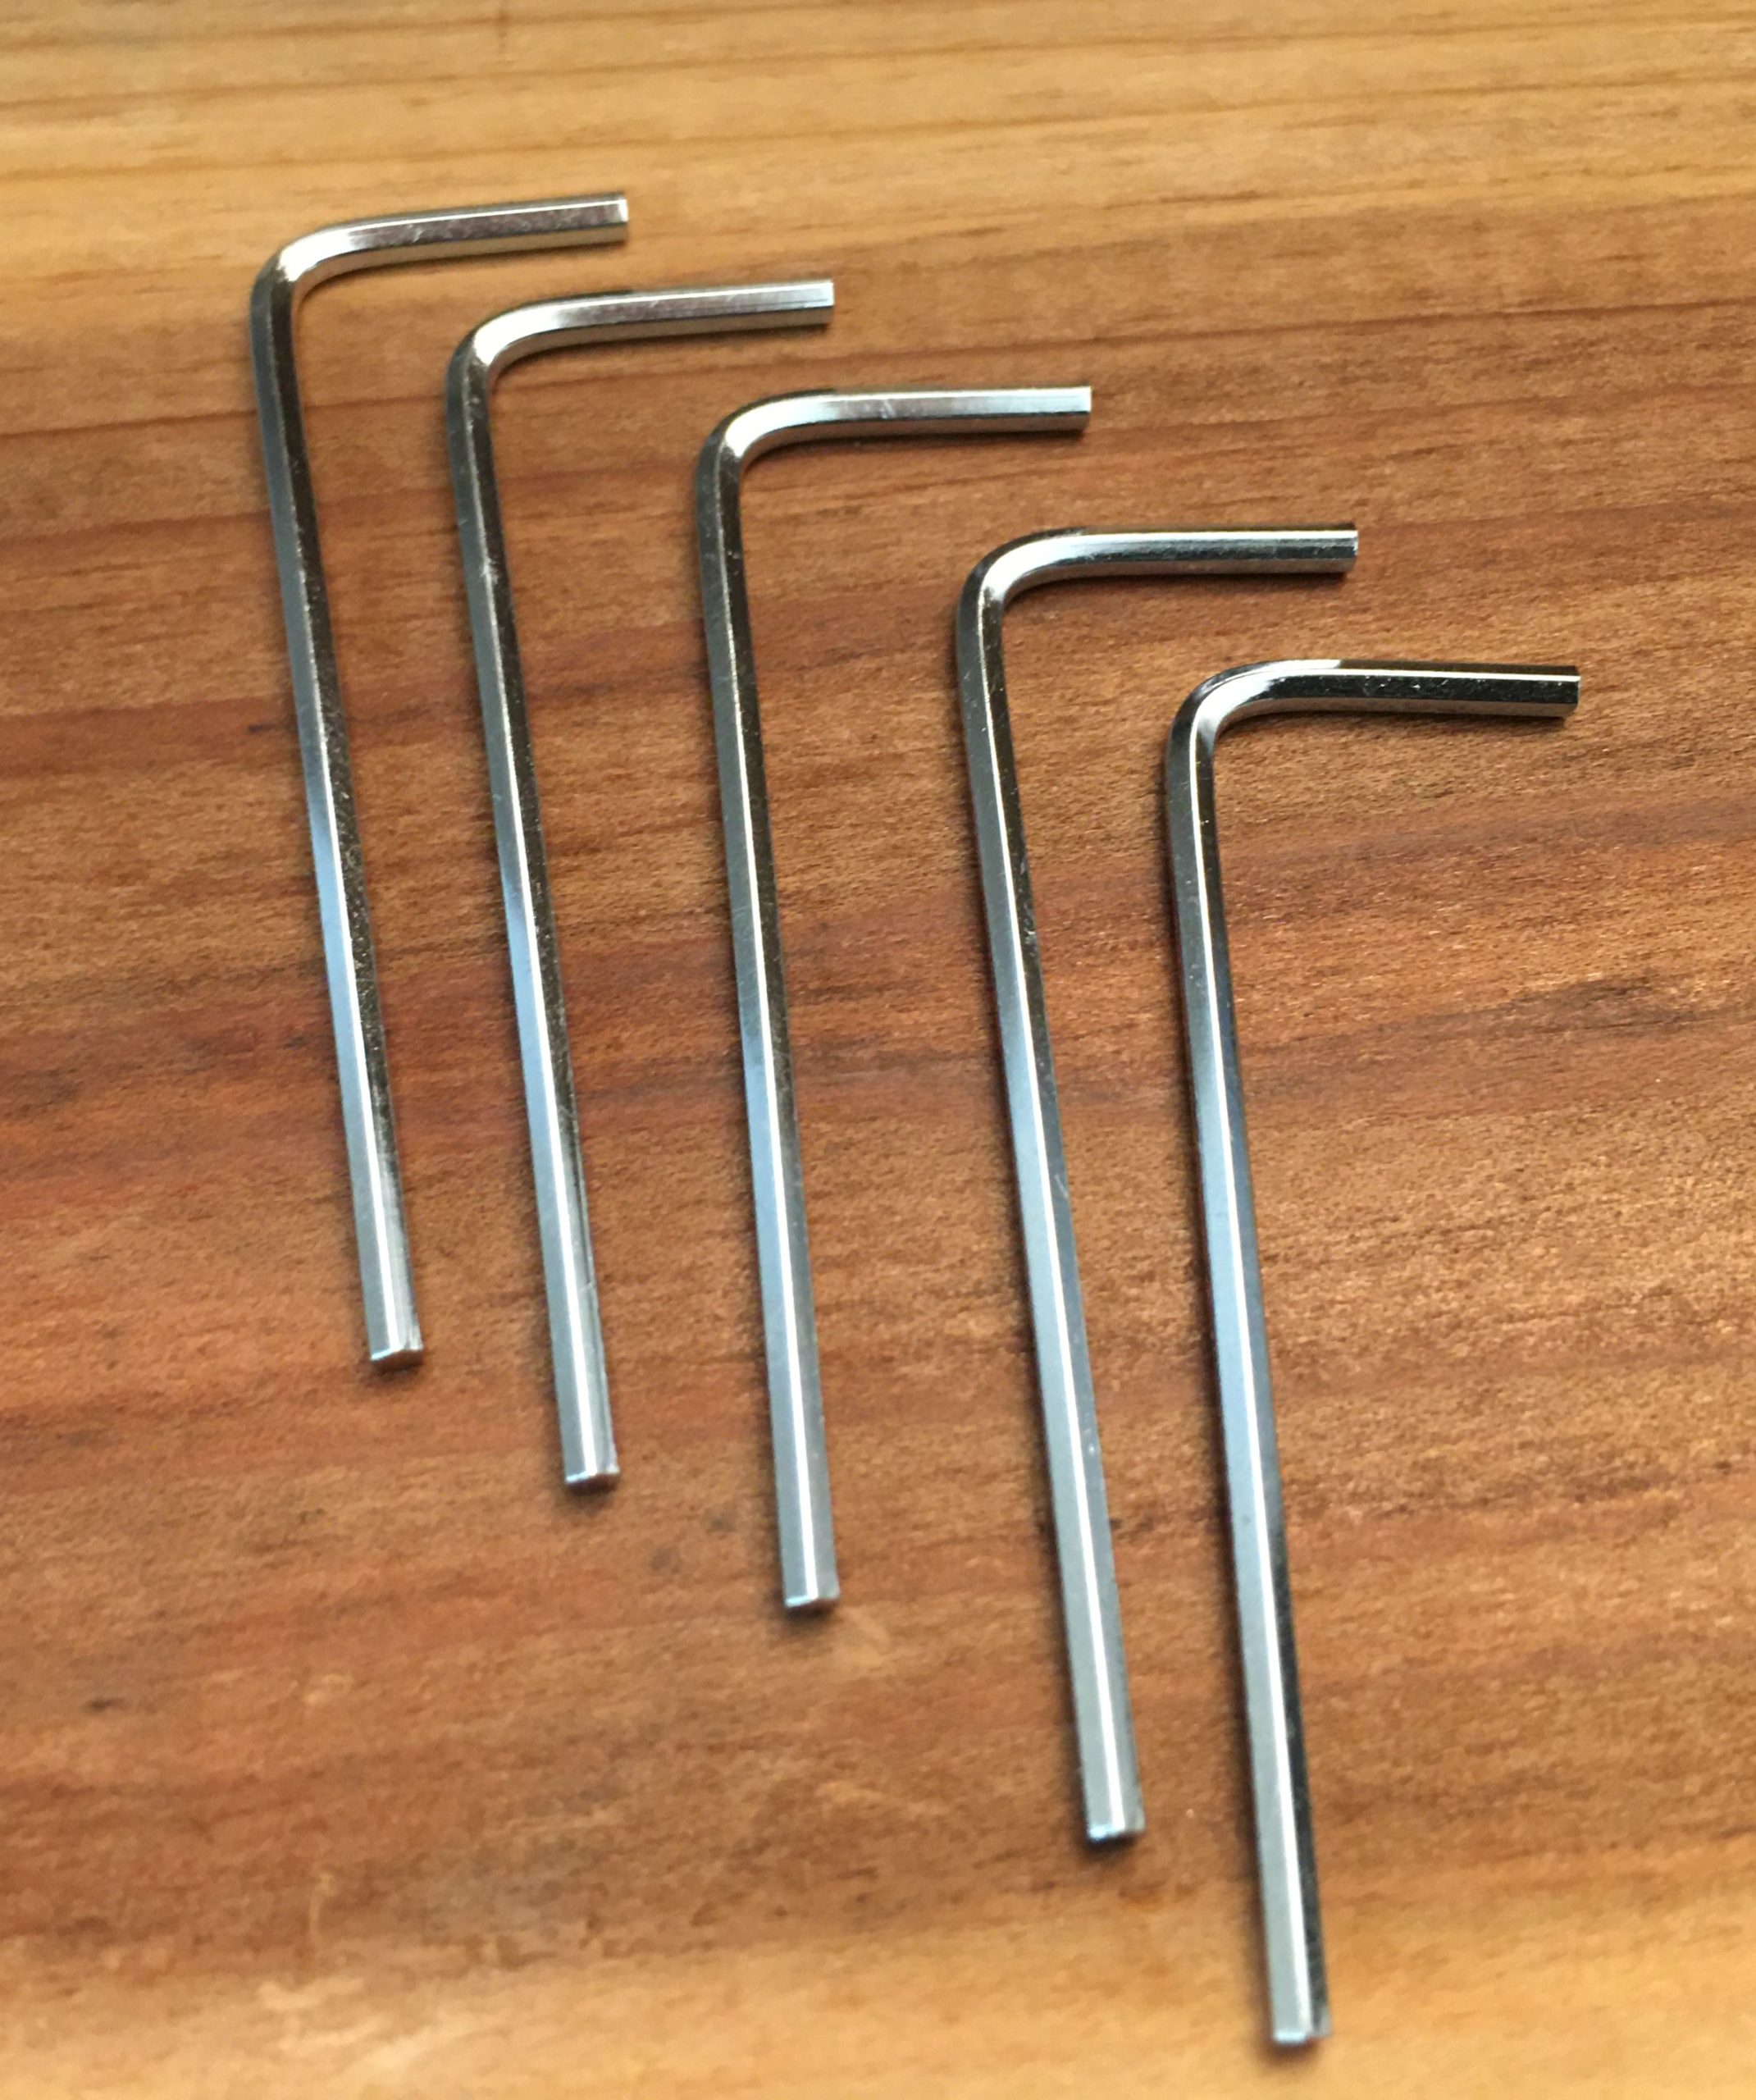 1.5mm Allen Wrenches